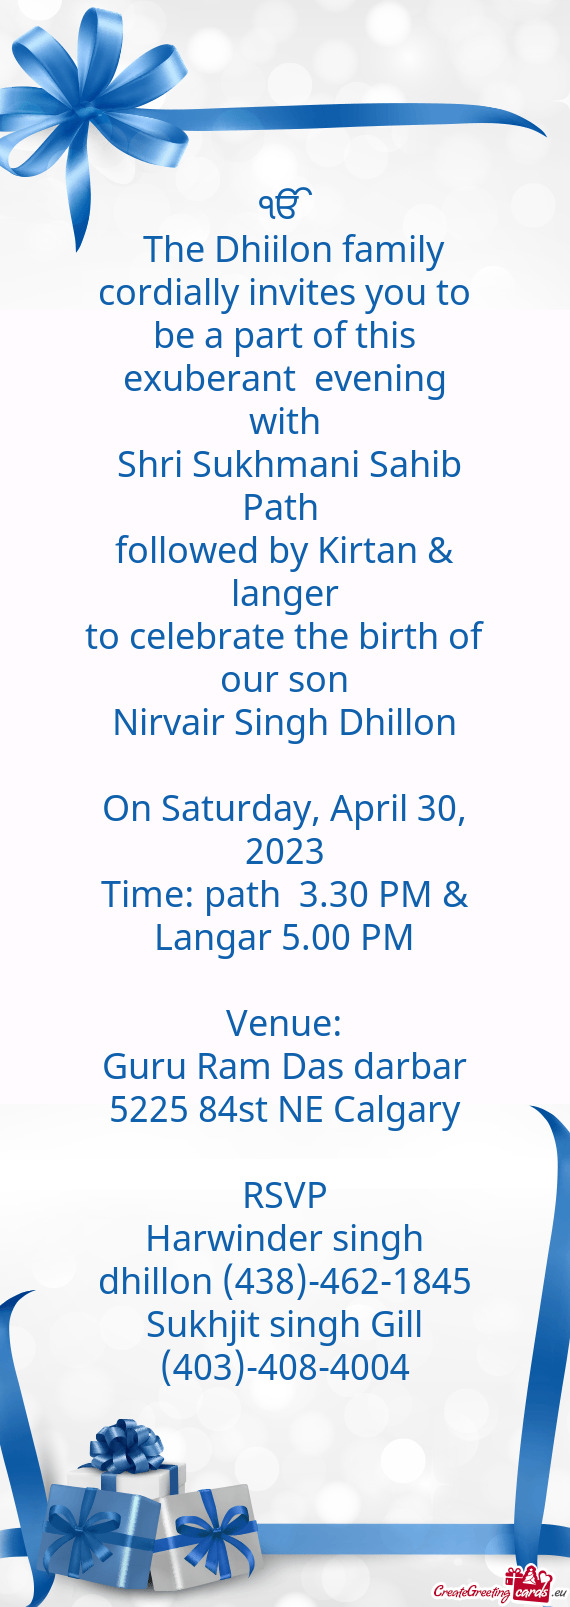 The Dhiilon family cordially invites you to be a part of this exuberant evening with